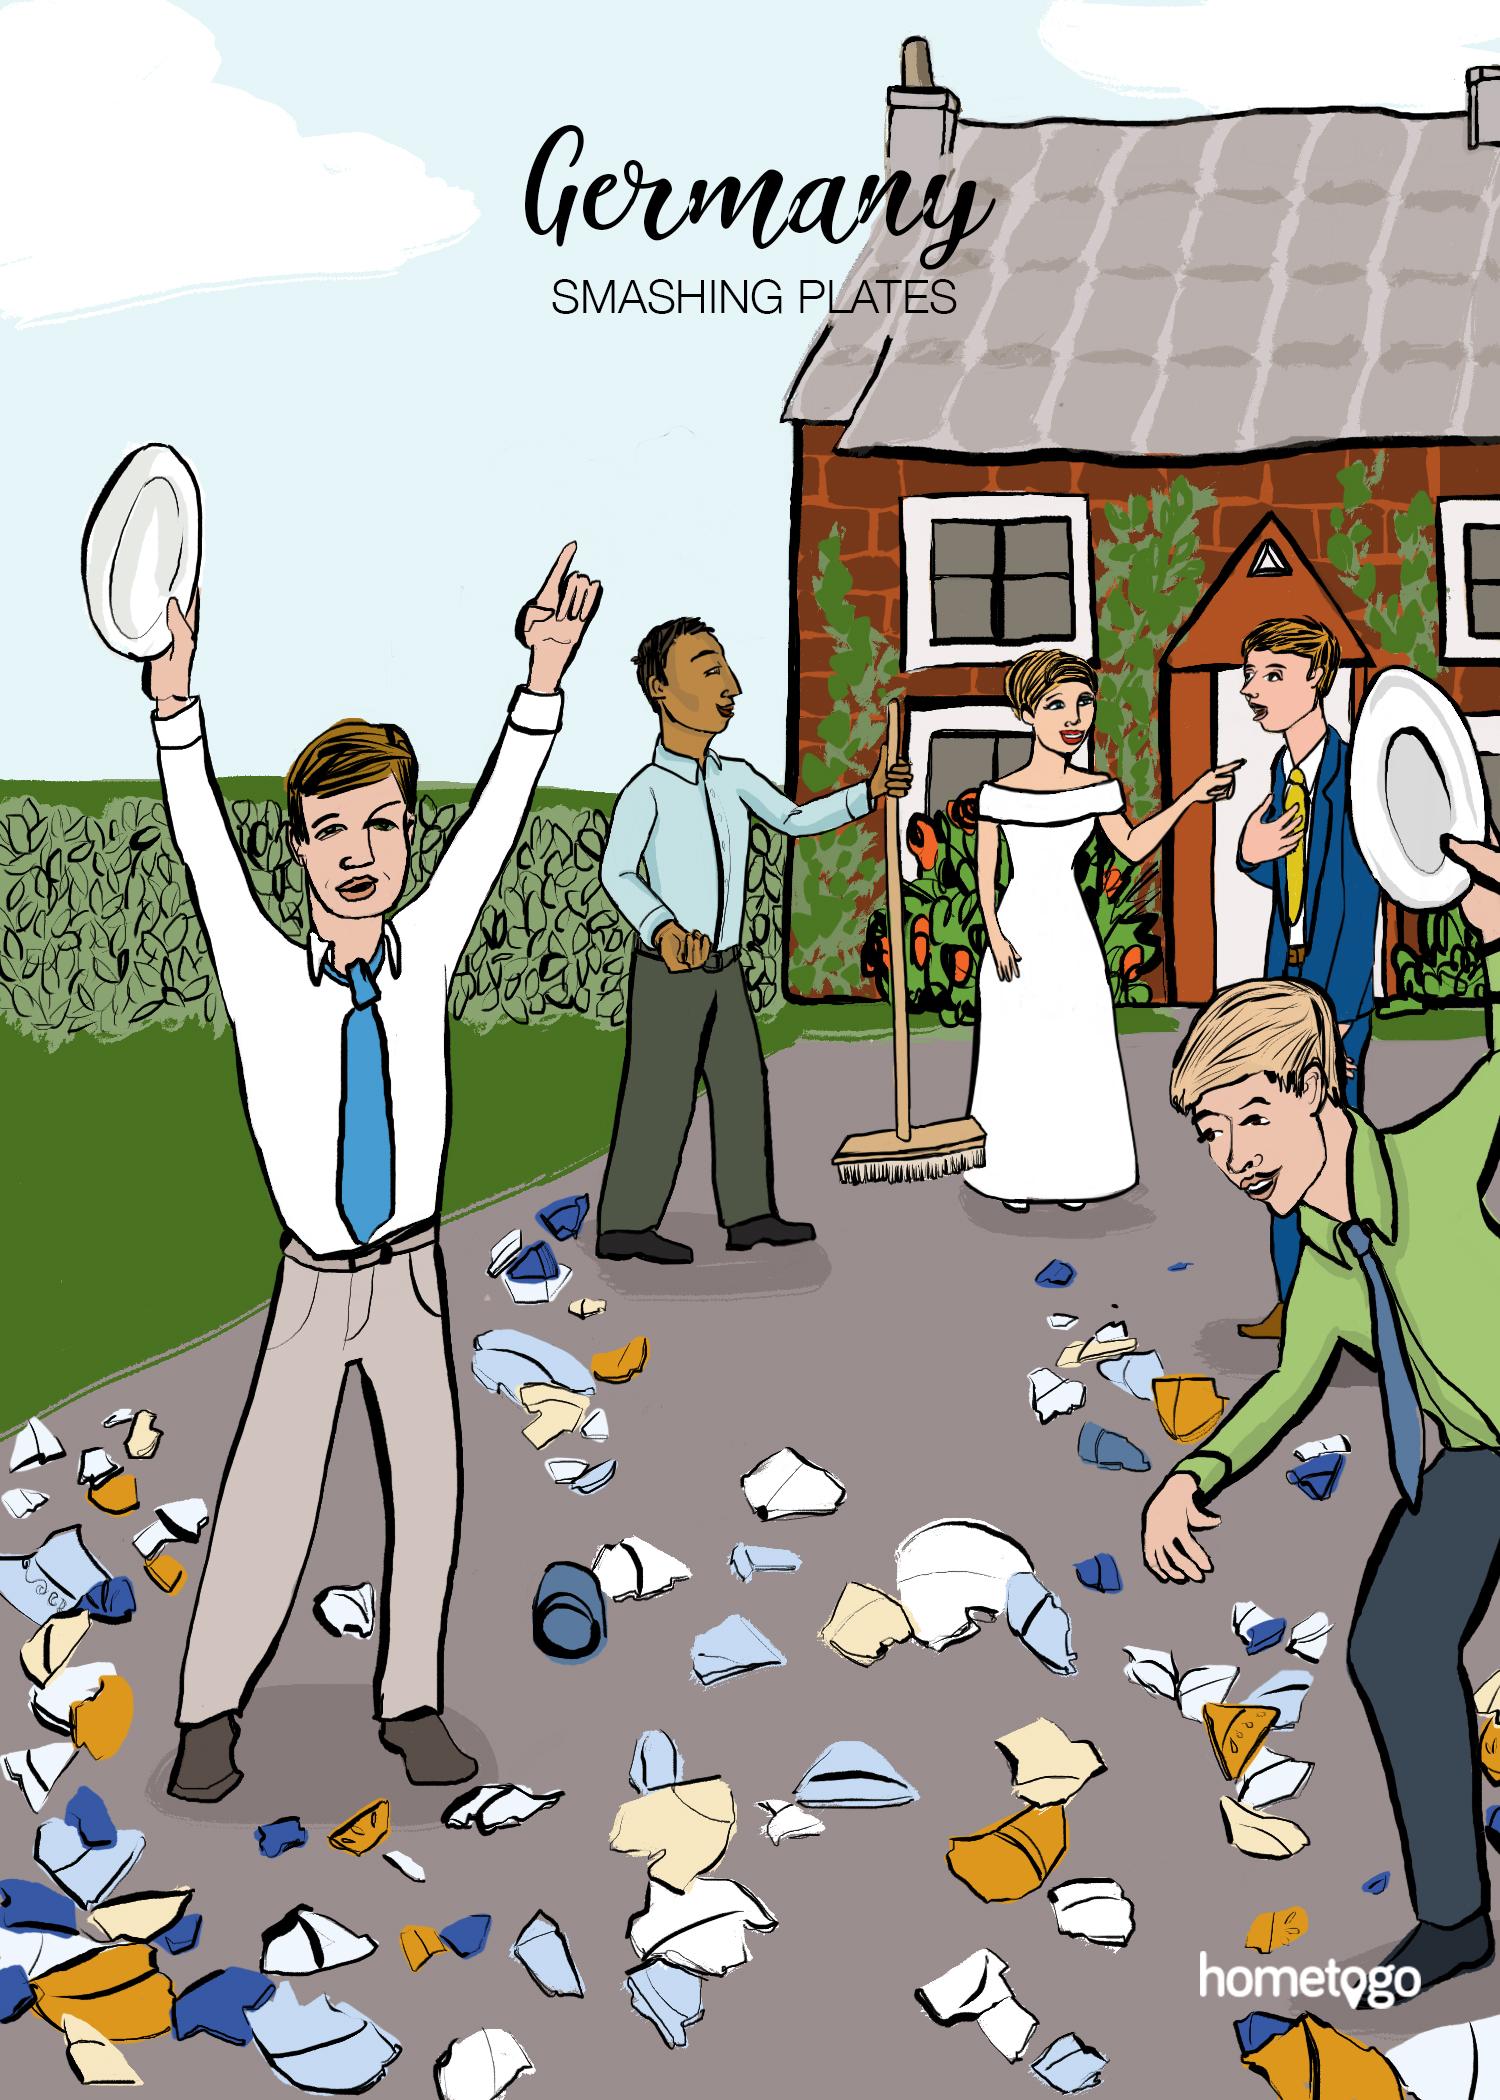 Illustration featuring the wedding custom from Germany, where the newlyweds smash plates before the wedding